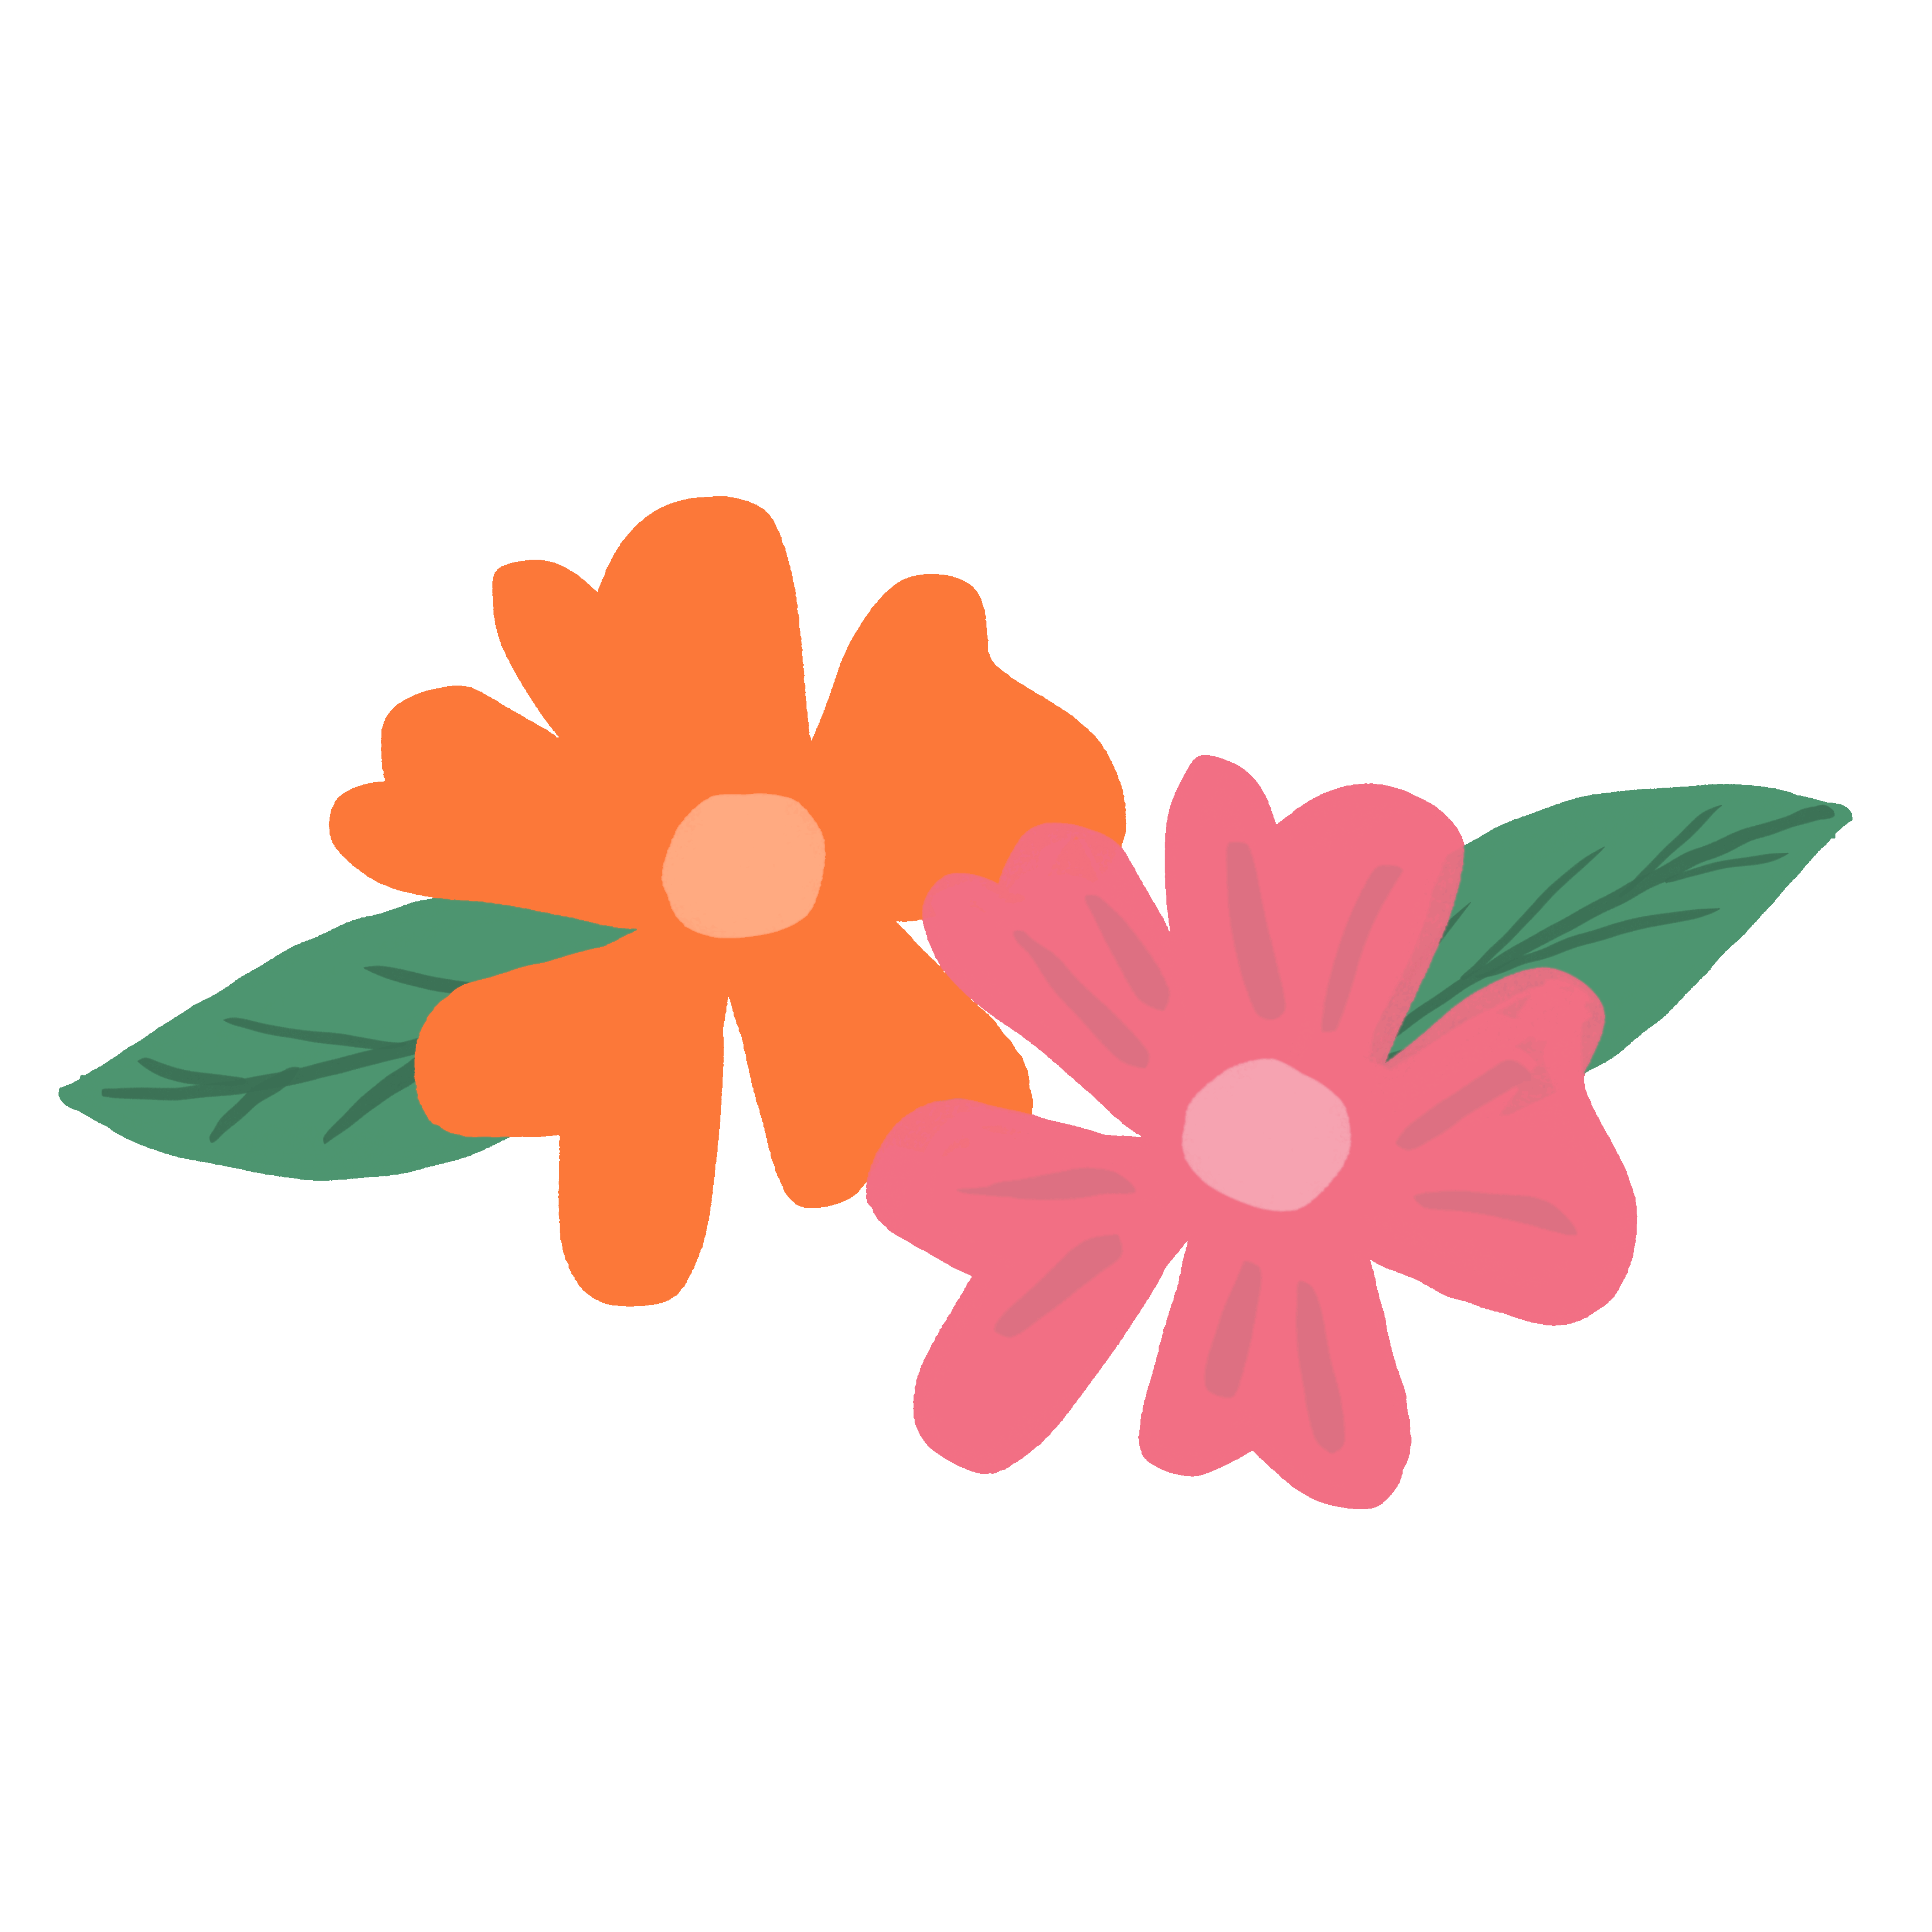 Flower Bunga  Sticker  for iOS Android GIPHY